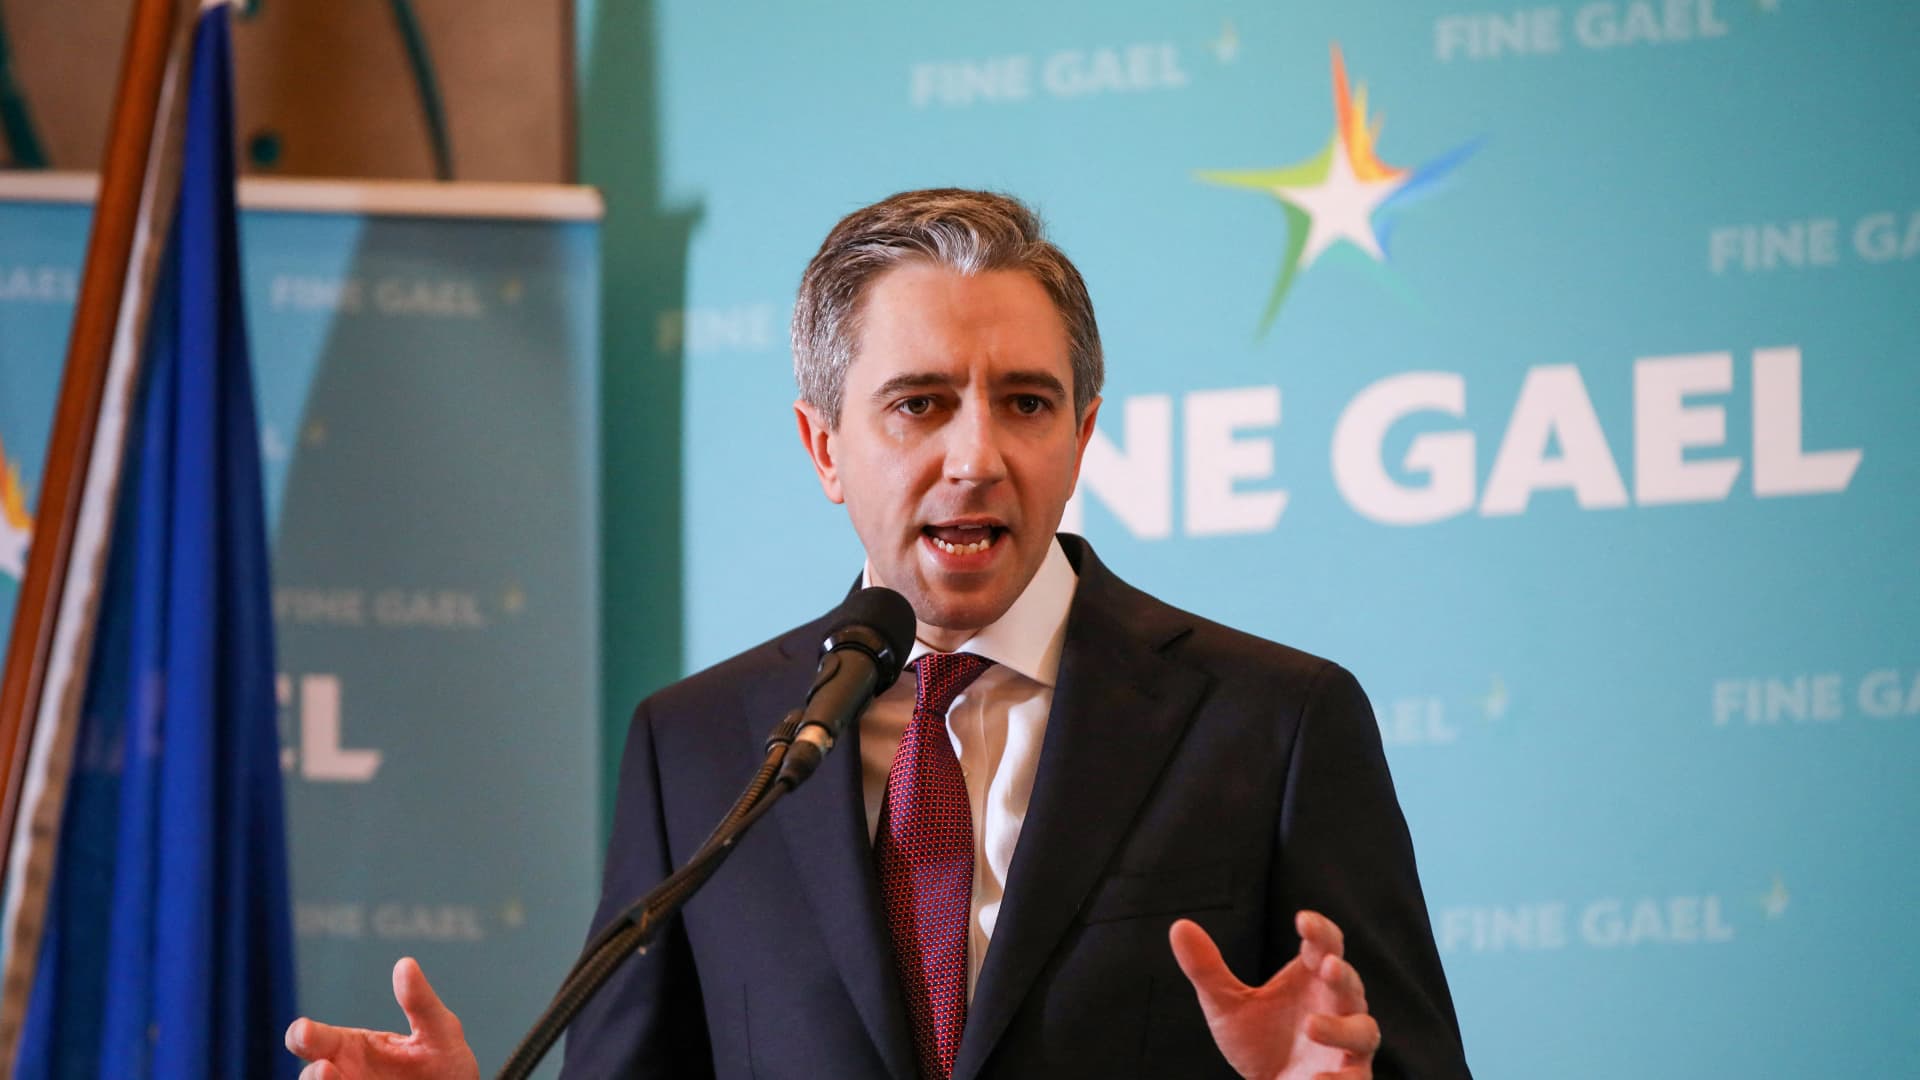 Newly-declared Fine Gael leader Simon Harris speaking at a convention in Athlone, central Ireland on March 24, 2024, after becoming de facto prime minister-in-waiting. Harris took over following the shock resignation of predecessor Leo Varadkar.